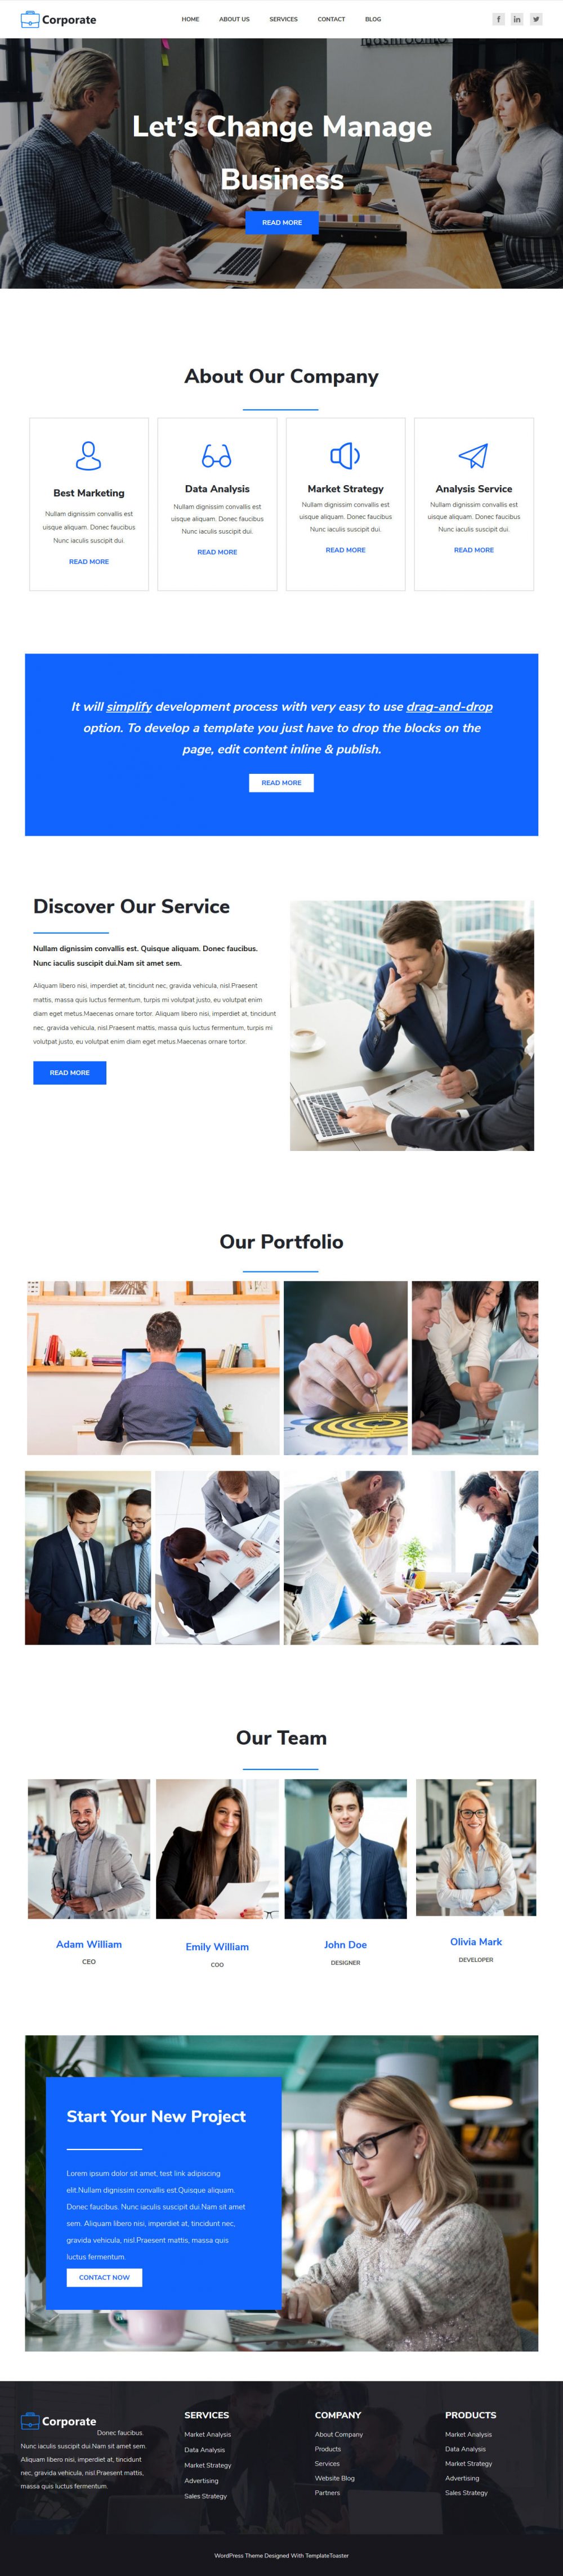 Corporate Business and Finance HTML Template